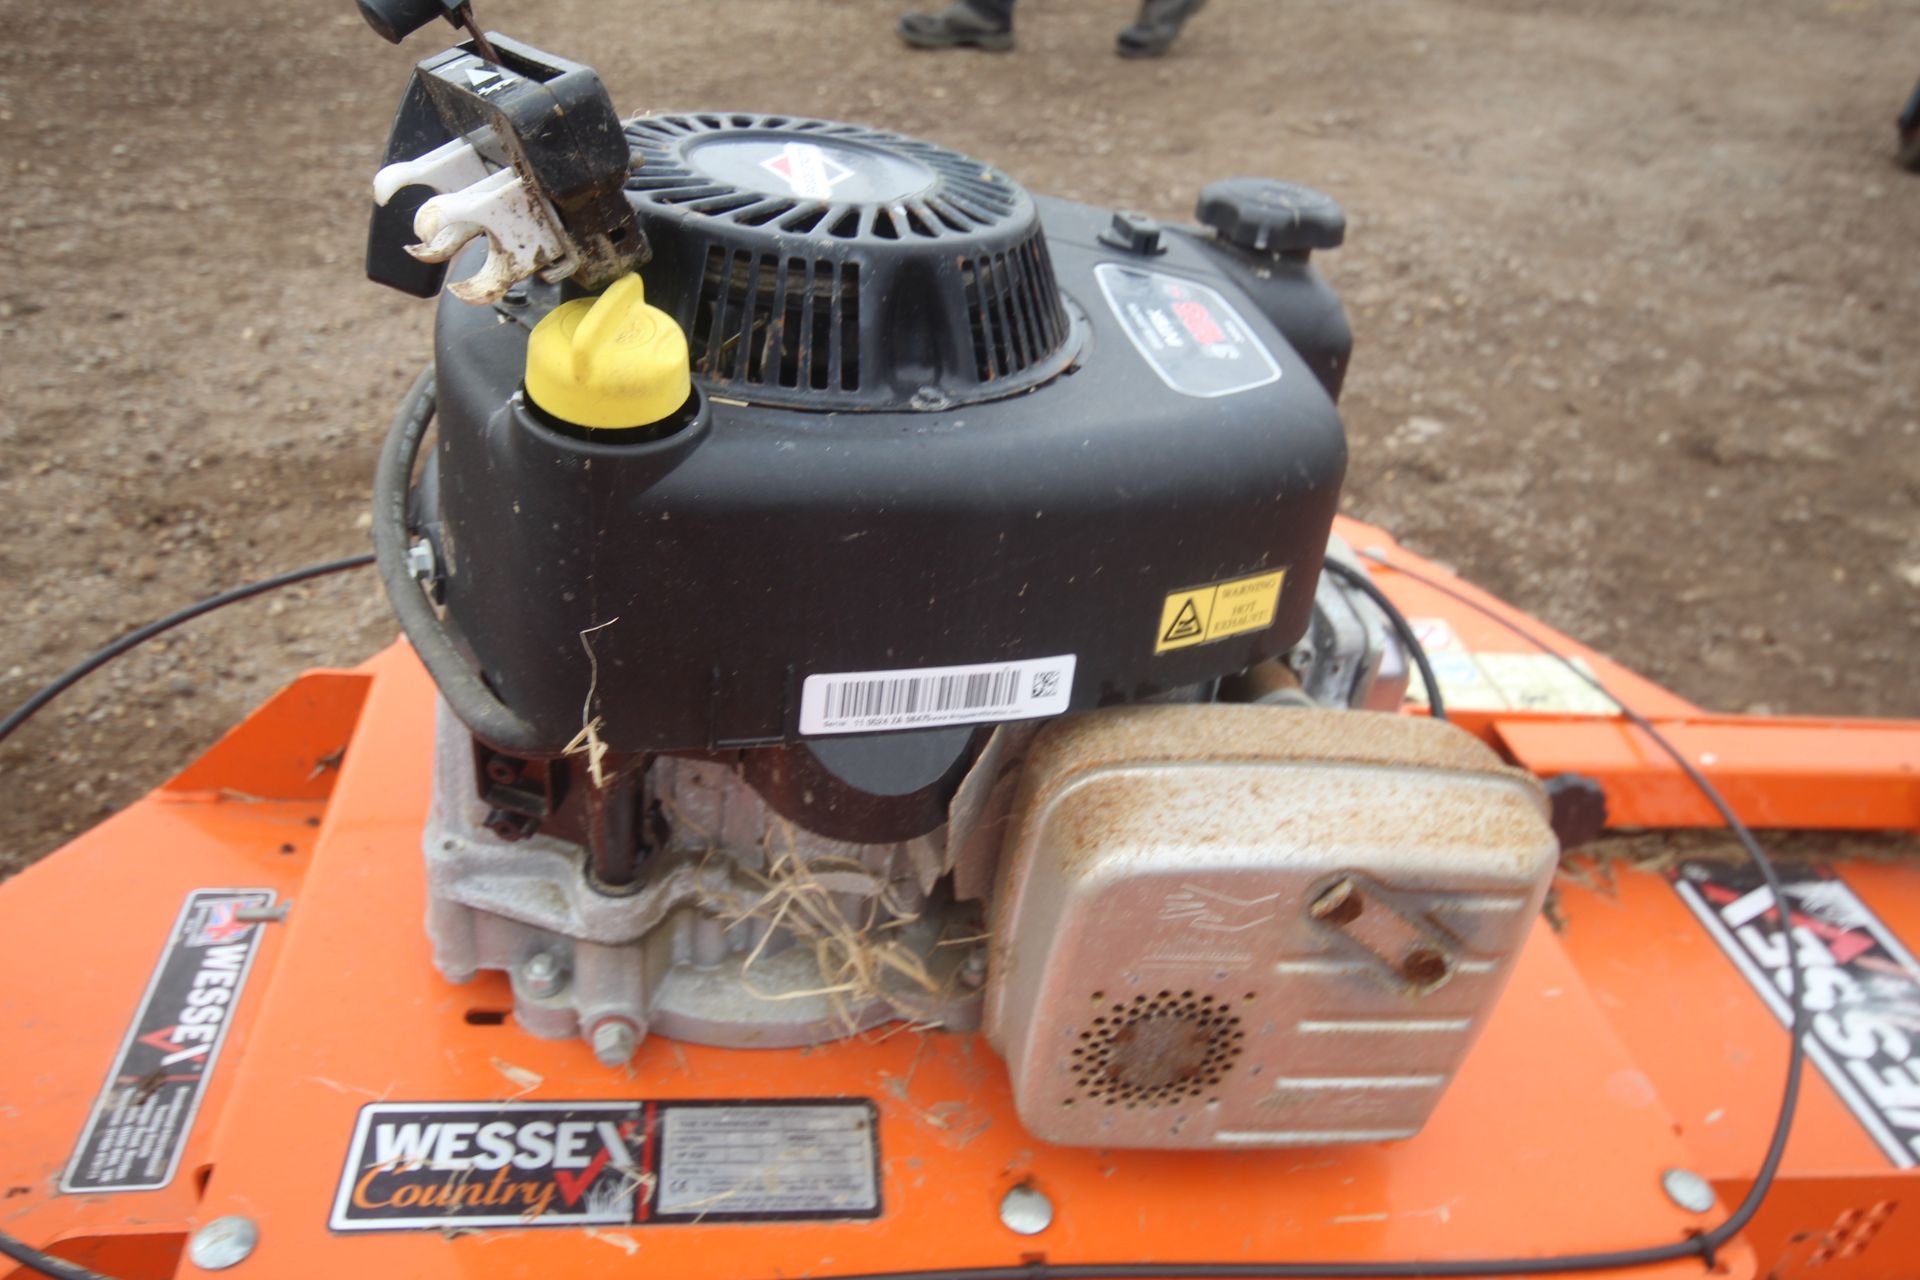 Wessex Country AT110 rotory topper for quad bike. 2012. With Briggs & Stratton petrol engine. V - Image 12 of 17